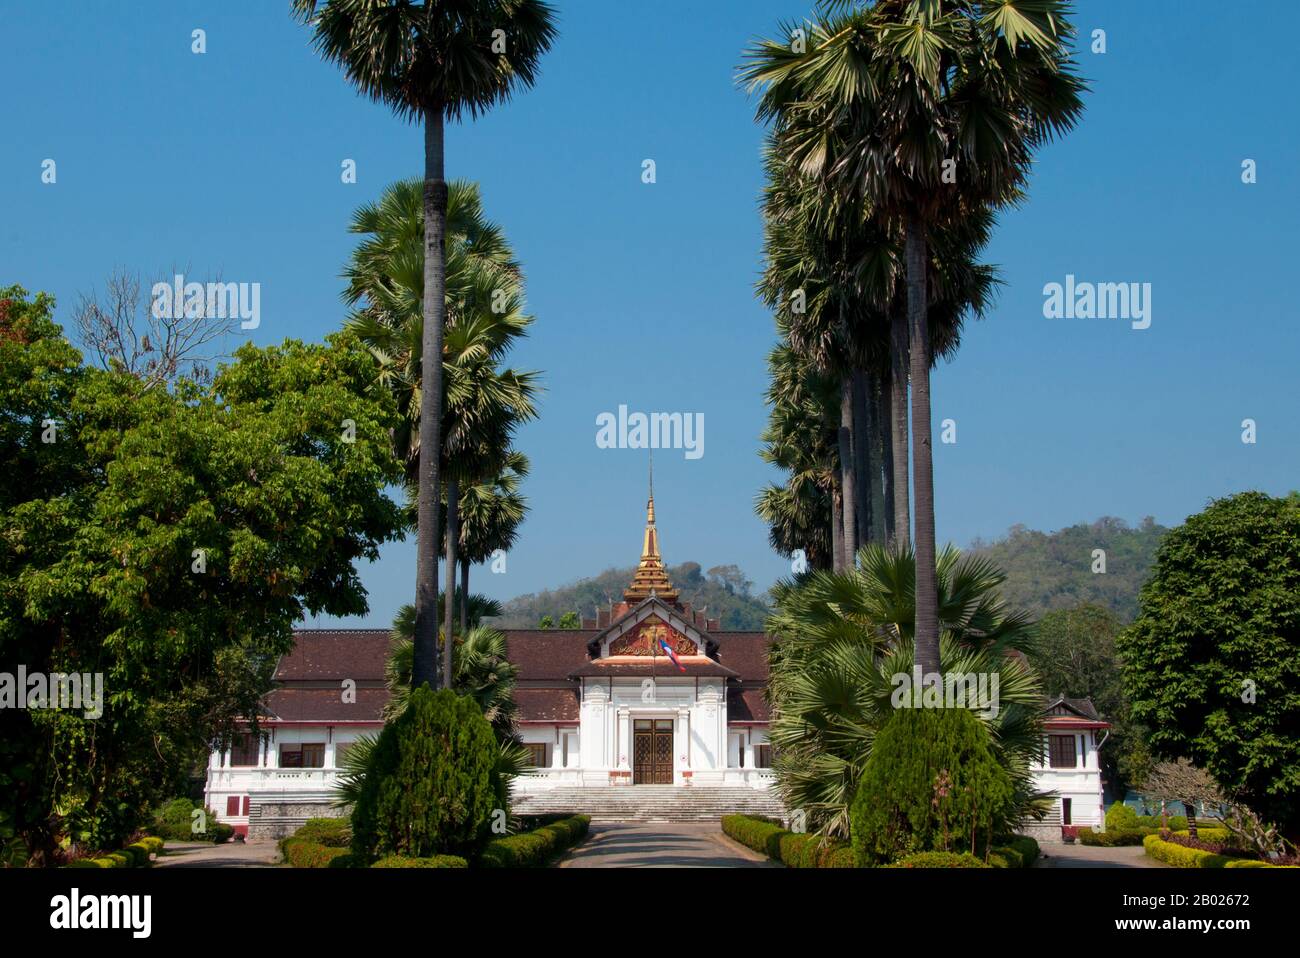 The Royal Palace (official name Haw Kham) in Luang Prabang, Laos, was built in 1904 during the French colonial era for King Sisavang Vong and his family. The site for the palace was chosen so that official visitors to Luang Prabang could disembark from their river voyages directly below the palace and be received there. After the death of King Sisavang Vong, the Crown Prince Savang Vatthana and his family were the last to occupy the grounds.  In 1975, the monarchy was overthrown by the communists and the Royal Family were taken to re-education camps. The palace was then converted into a nation Stock Photo